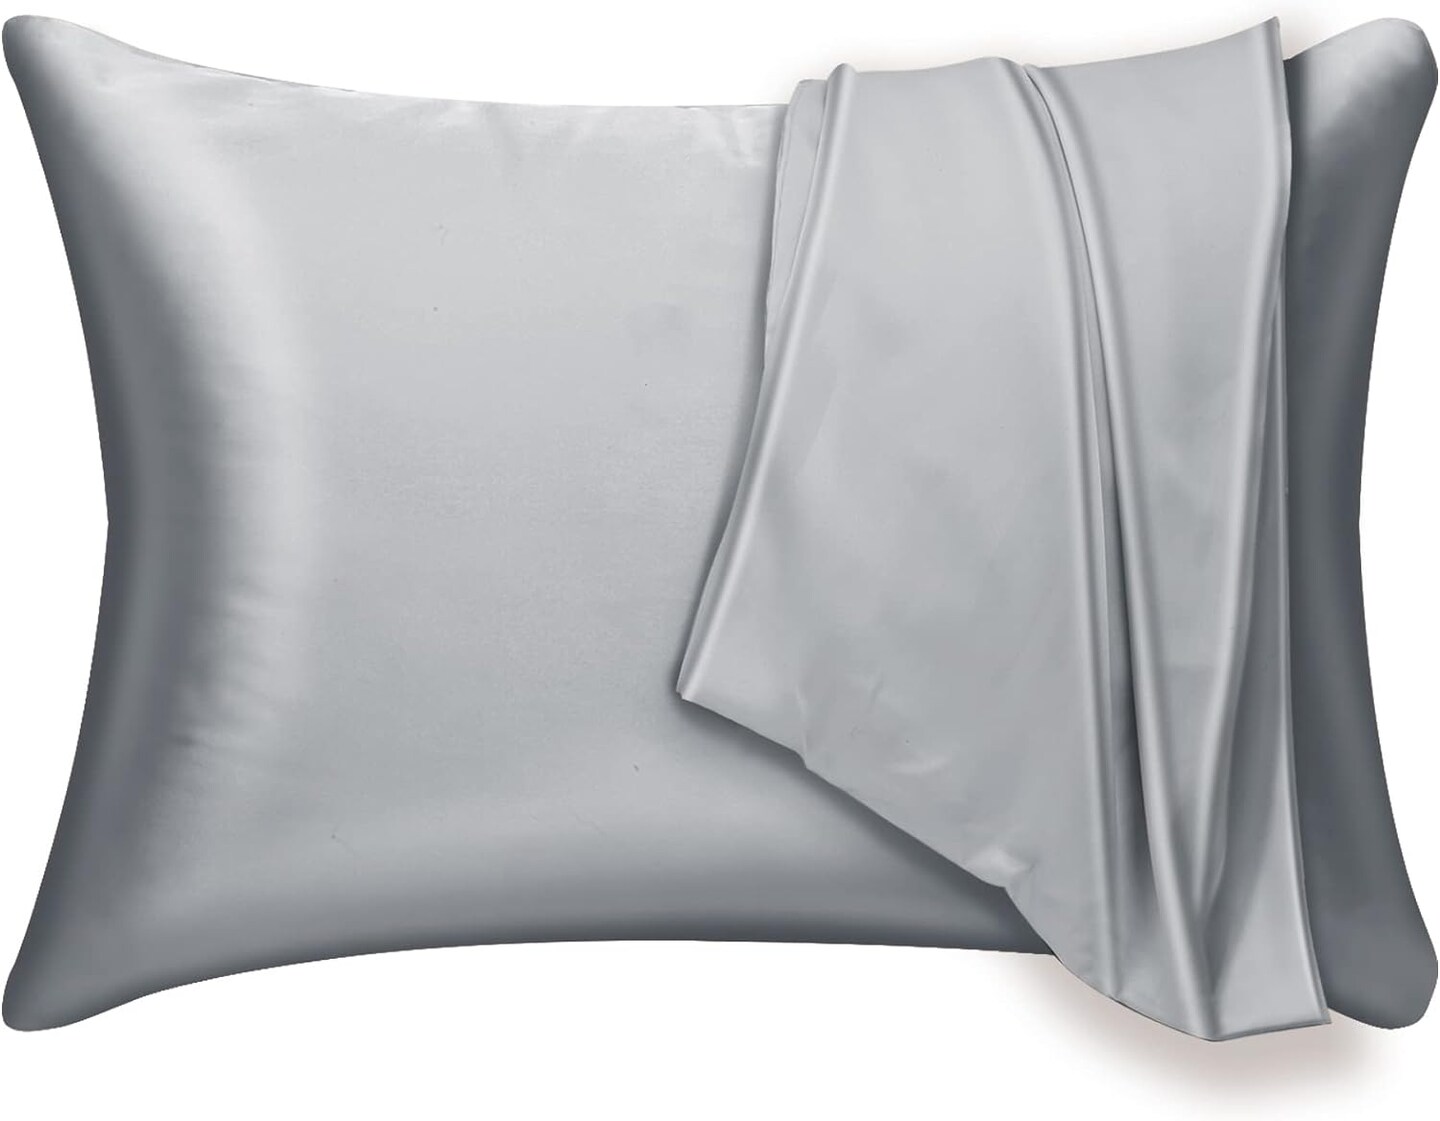 Mulberry Silk Pillowcase 2 Pack Standard Size For Hair and Skin